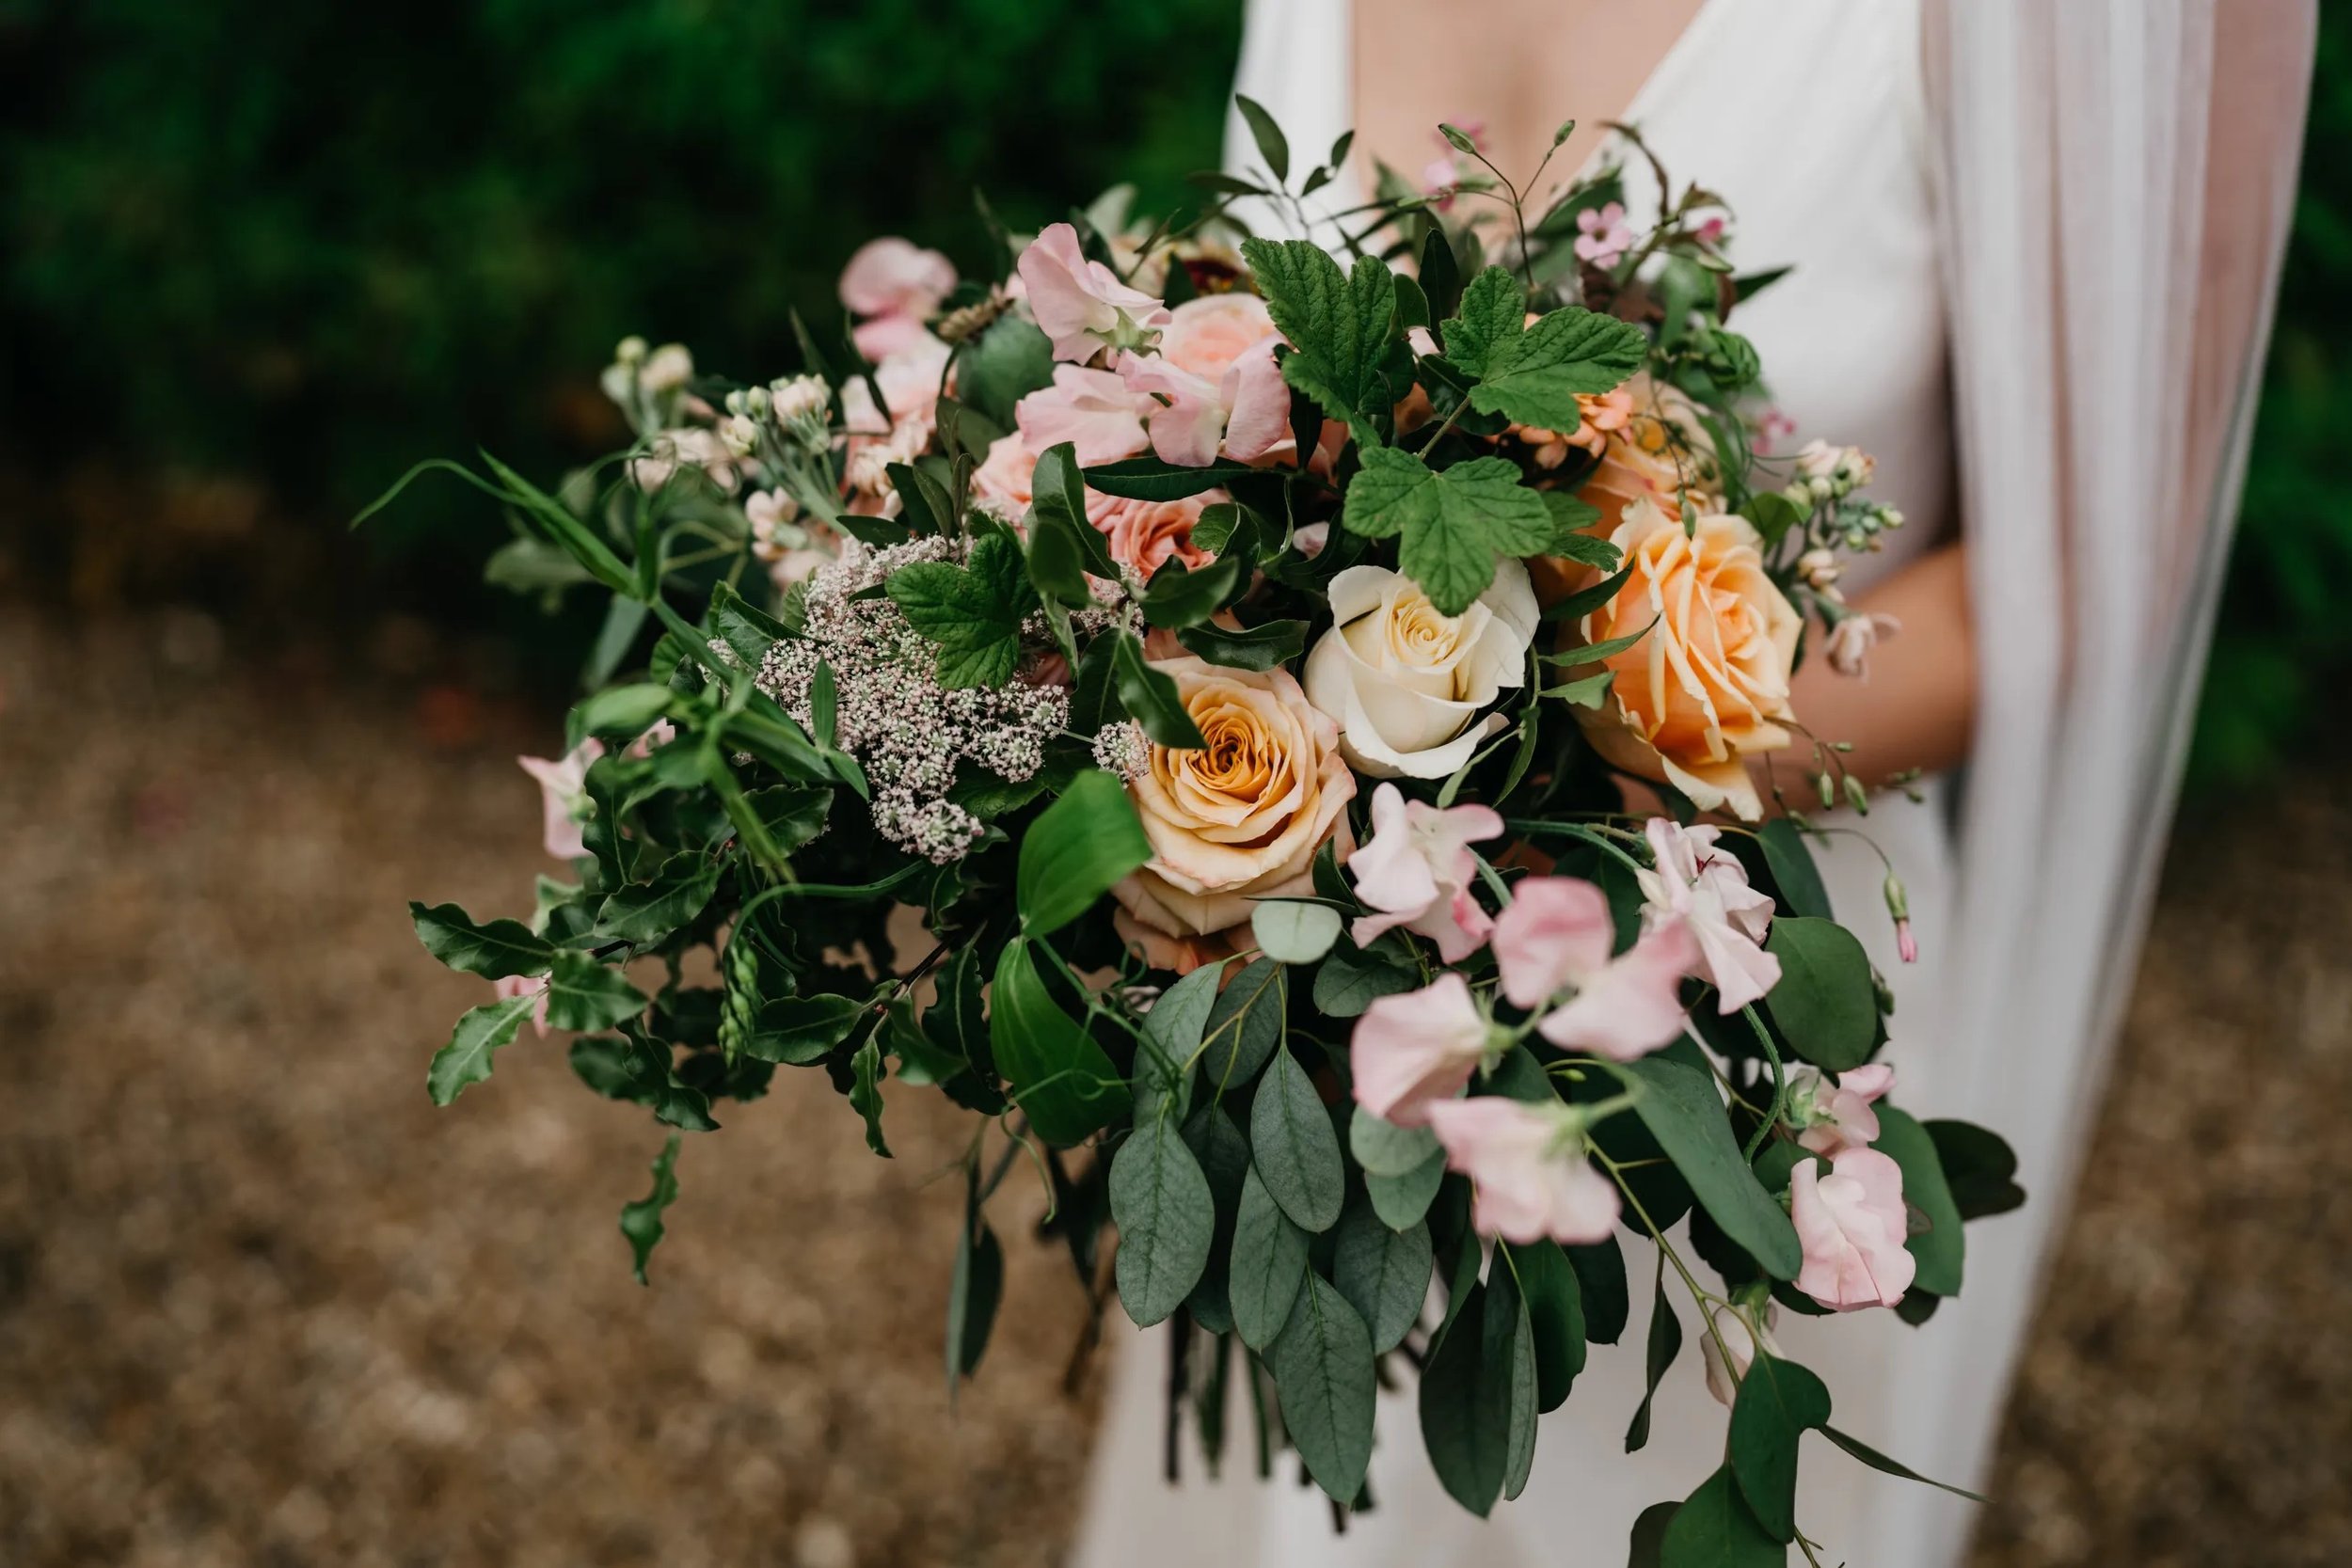  A close up image of a bride holding her large bridal bouquet, which is seasonal and looks natural with the soft pink and neutral florals amongst the greenery and foliage.  Photo by: Ed Godden @edgodden 